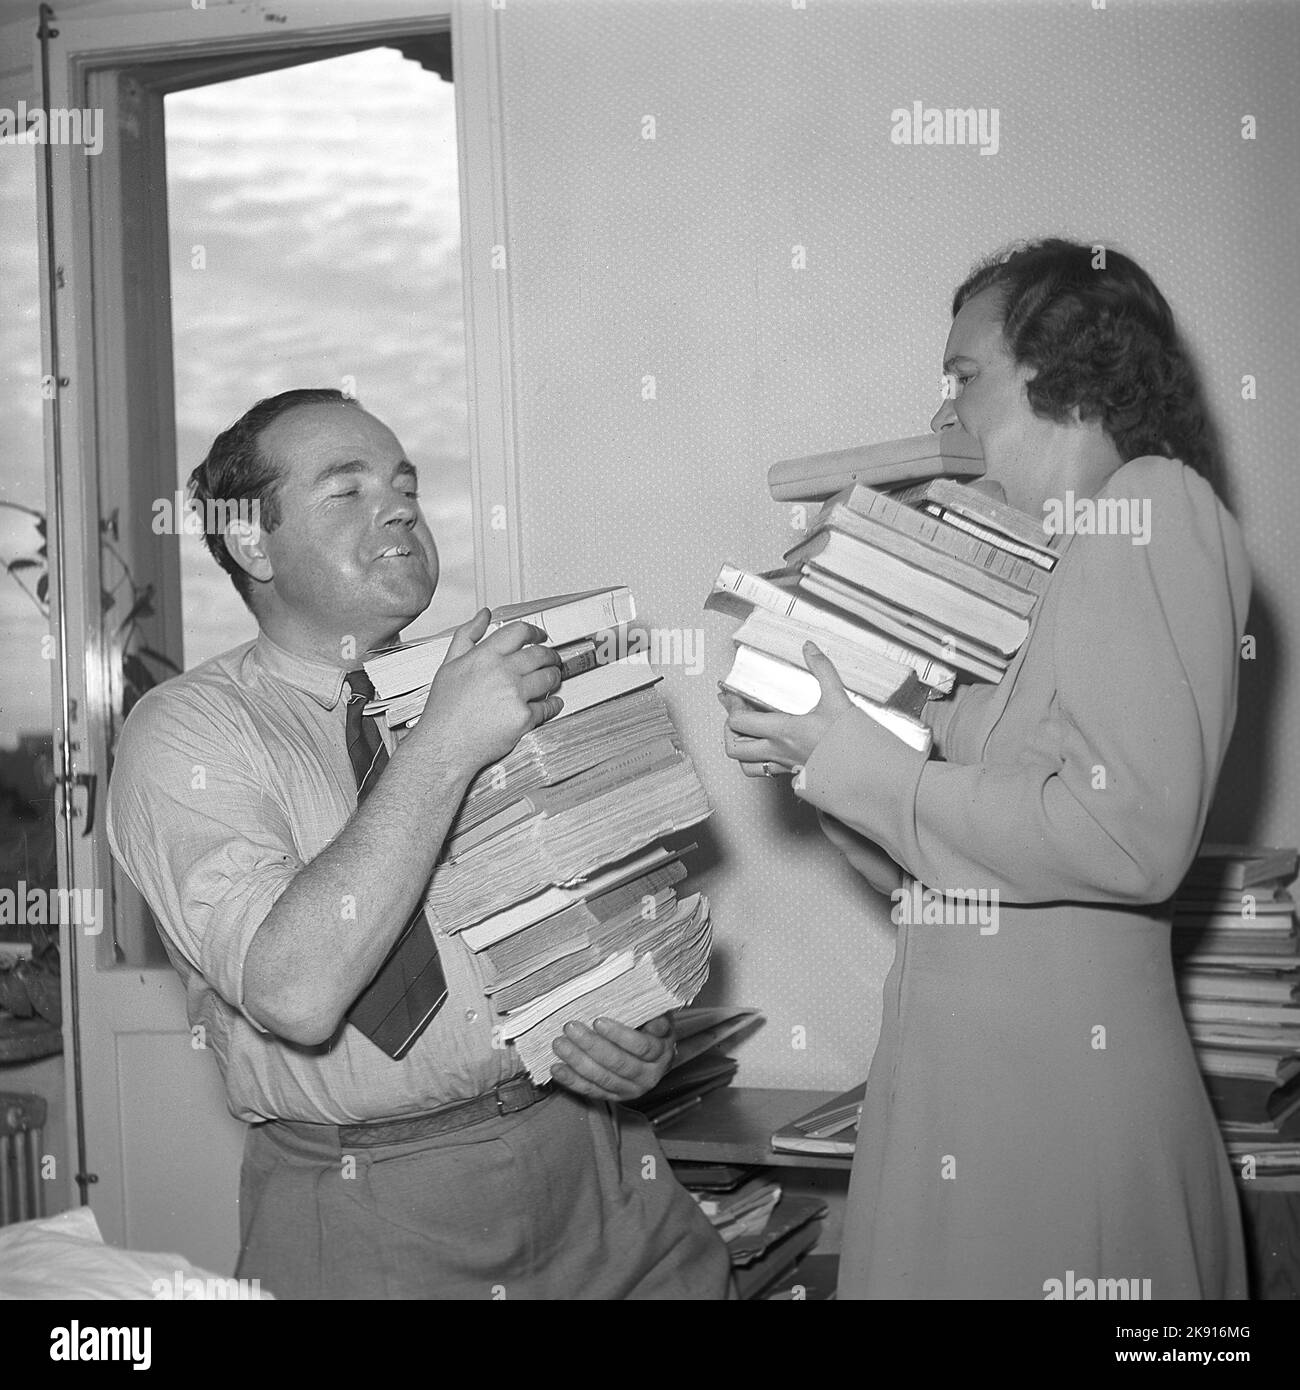 Moving in the 1940s. Actress Inga-Bodil Vetterlund is moving and gets a helping hand by travelbook author Milke. They both are holding as many books as they can. Sweden 1945. Kristofferson ref O140-3 Stock Photo